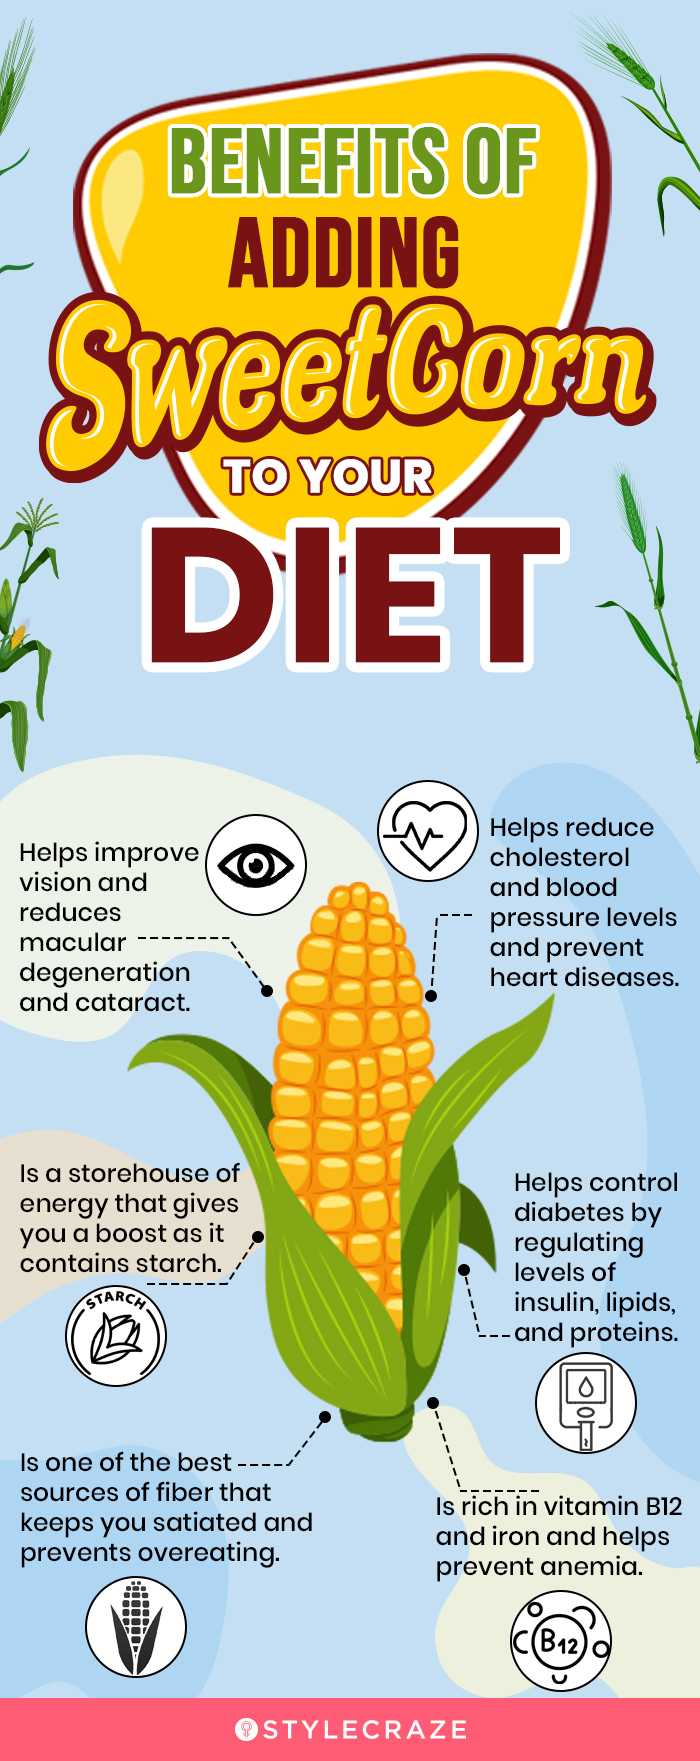 is corn good for weight loss?